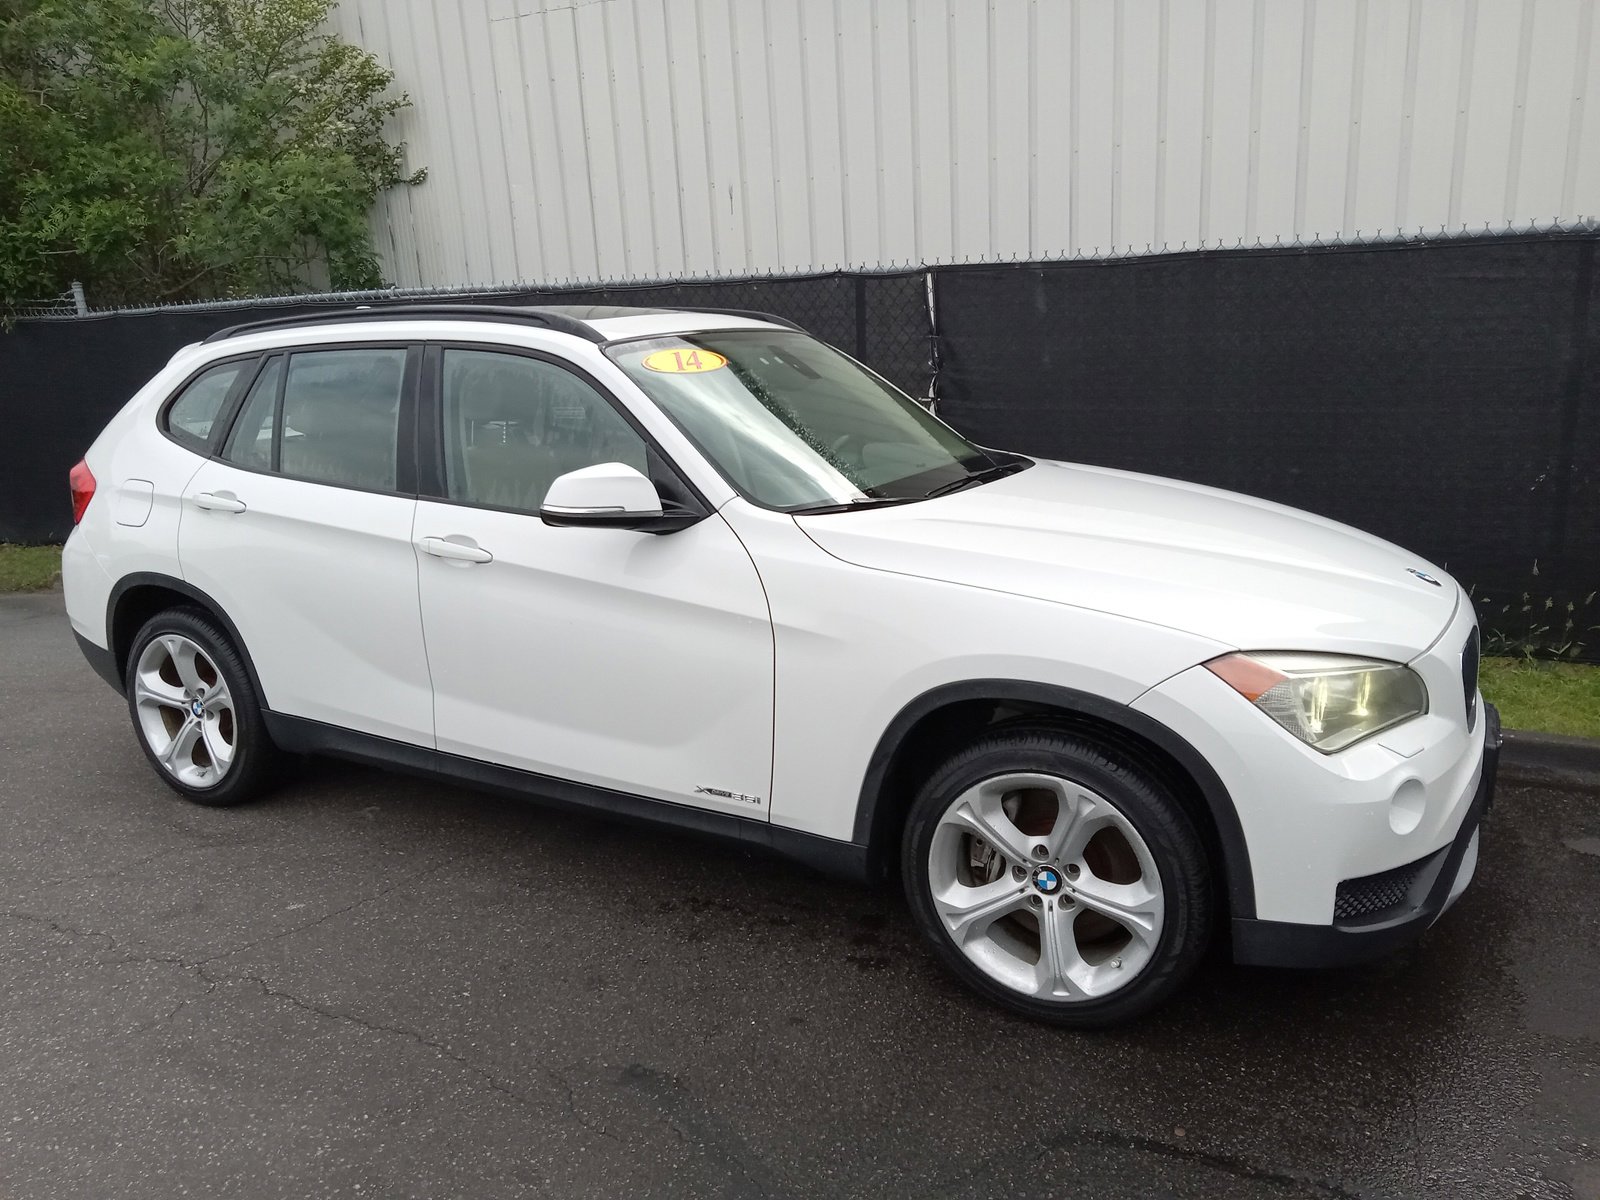 BMW X1 For Sale in Portsmouth, VA - TOWN AUTOPLANET LLC